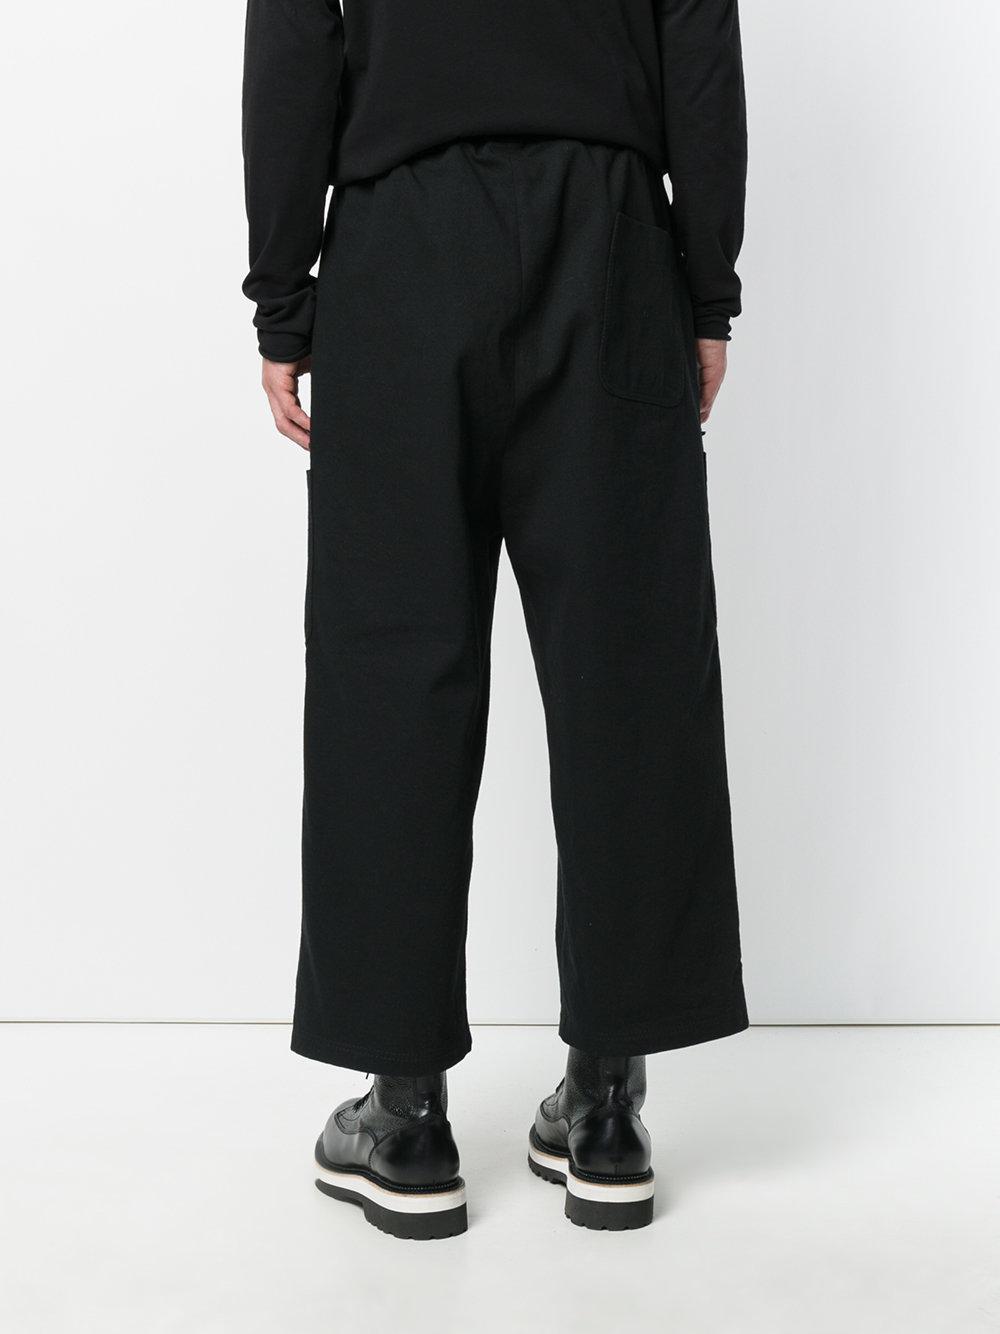 Lyst - Damir Doma Primo Trousers in Black for Men